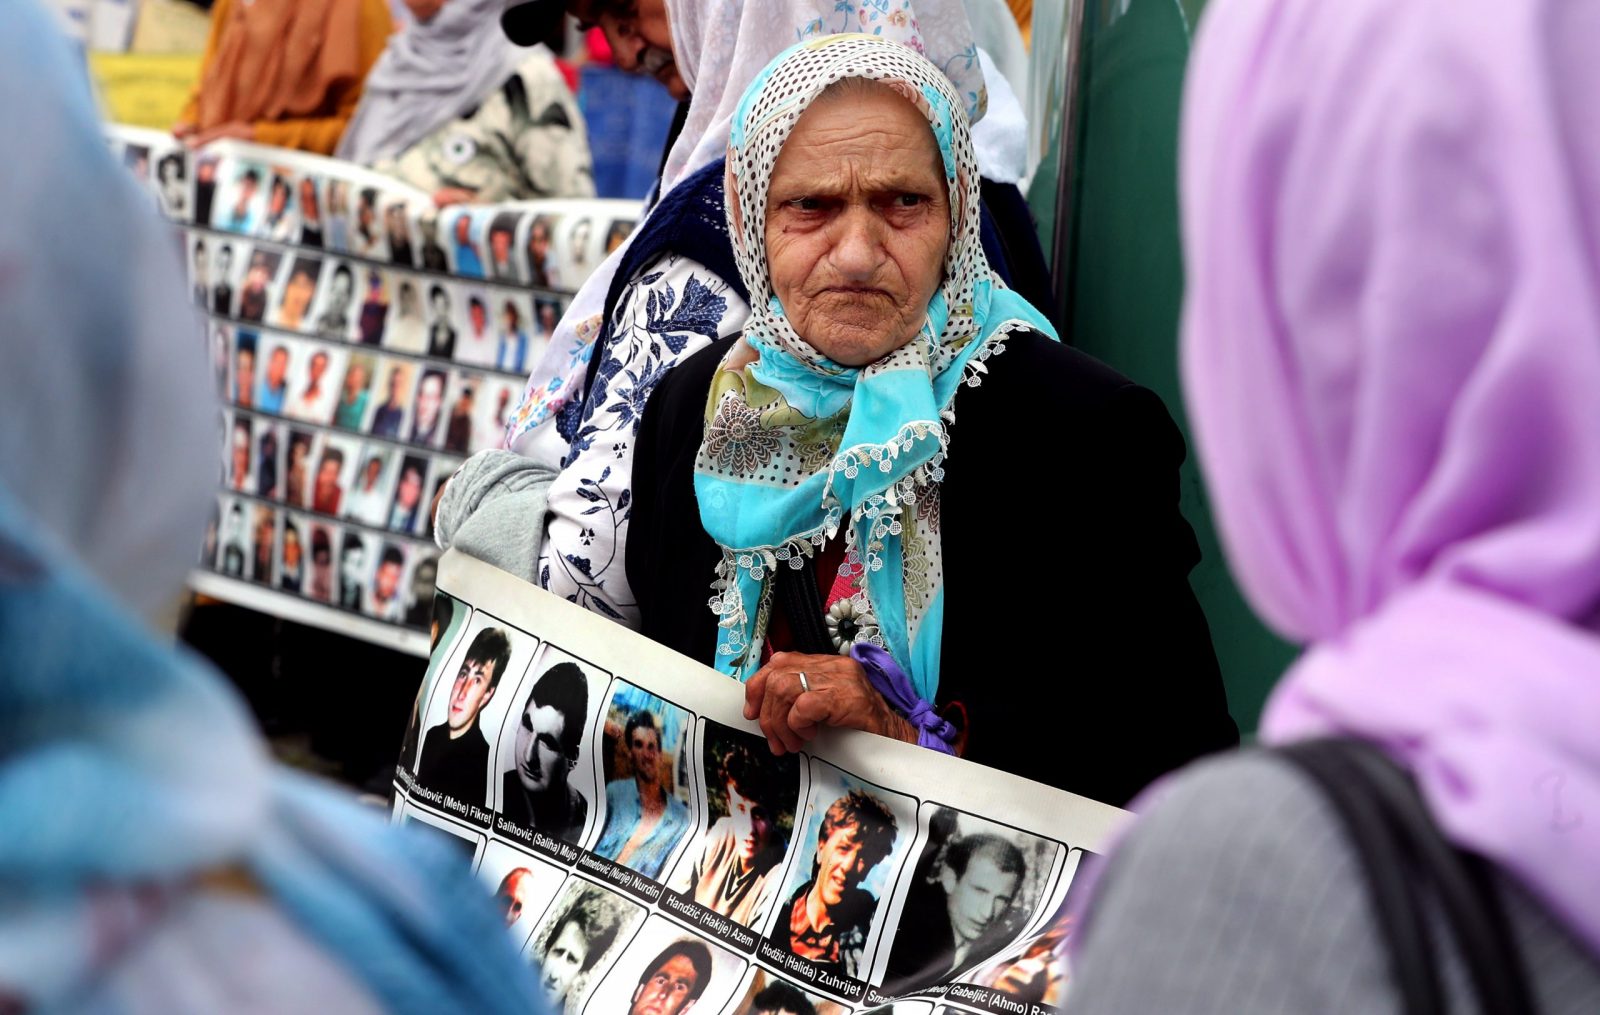 epa10685031 Women from Srebrenica hold banners showing pictures of the 1995 Srebrenica massacre, during a peaceful demonstration at Alija Izetbegovic Square in Zenica, Bosnia and Herzegovina, 11 June 2023. More than 8,000 Muslim men and boys were executed in July 1995 after Bosnian Serb forces overran the town of Srebrenica during the Bosnian War. The protest takes place every 11th of the month across different cities of Bosnia and Herzegovina.  EPA/FEHIM DEMIR